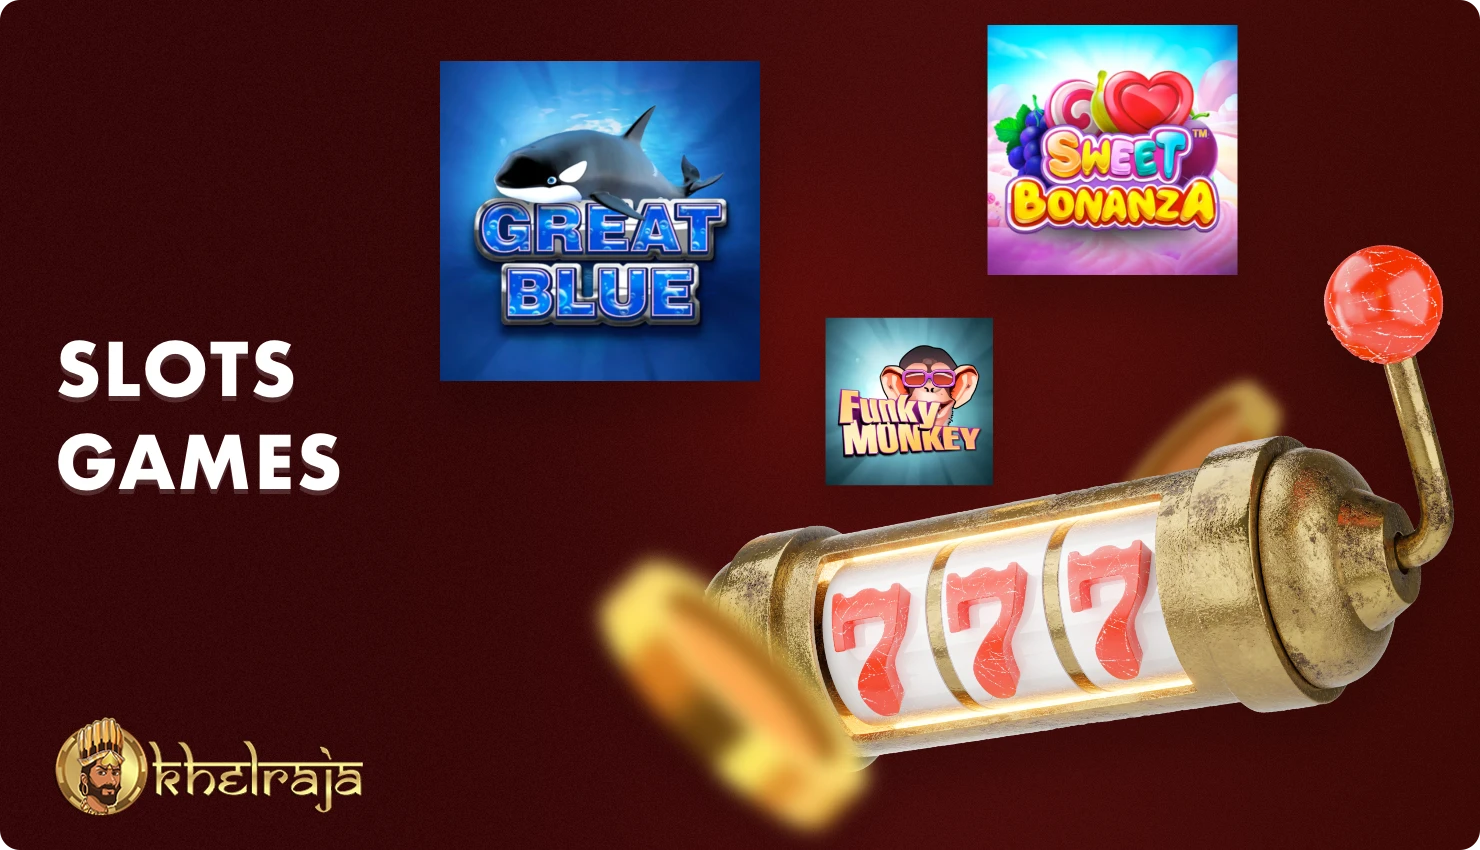 On the Khelraja platform Indian users can play hundreds of popular slots